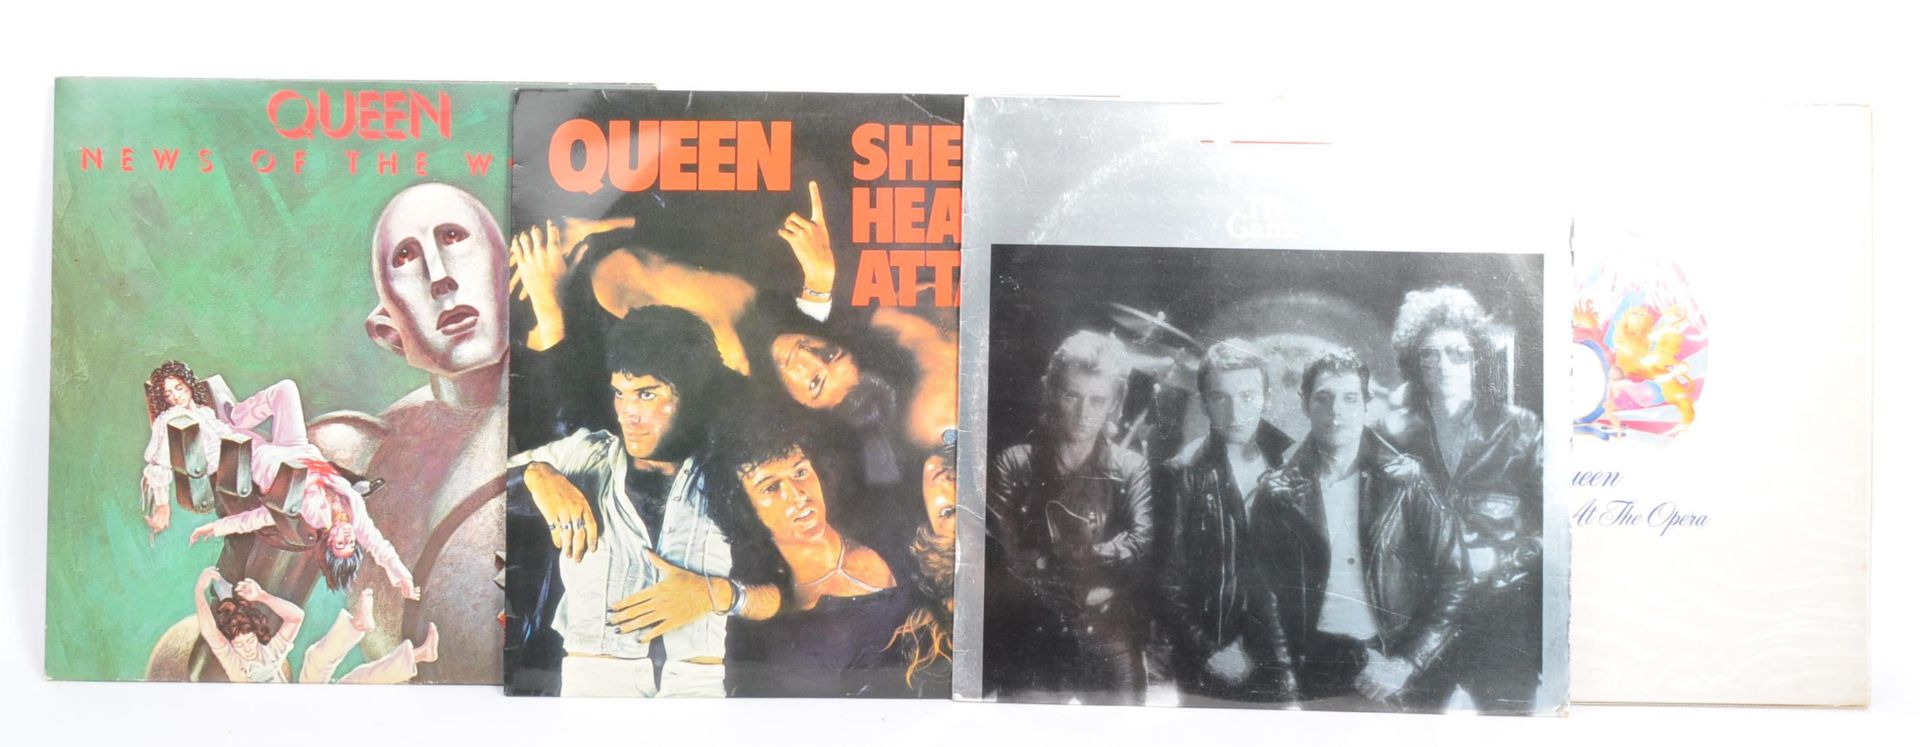 QUEEN & DEEP PURPLE - COLLECTION OF LONG PLAY RECORD VINYLS - Image 5 of 5